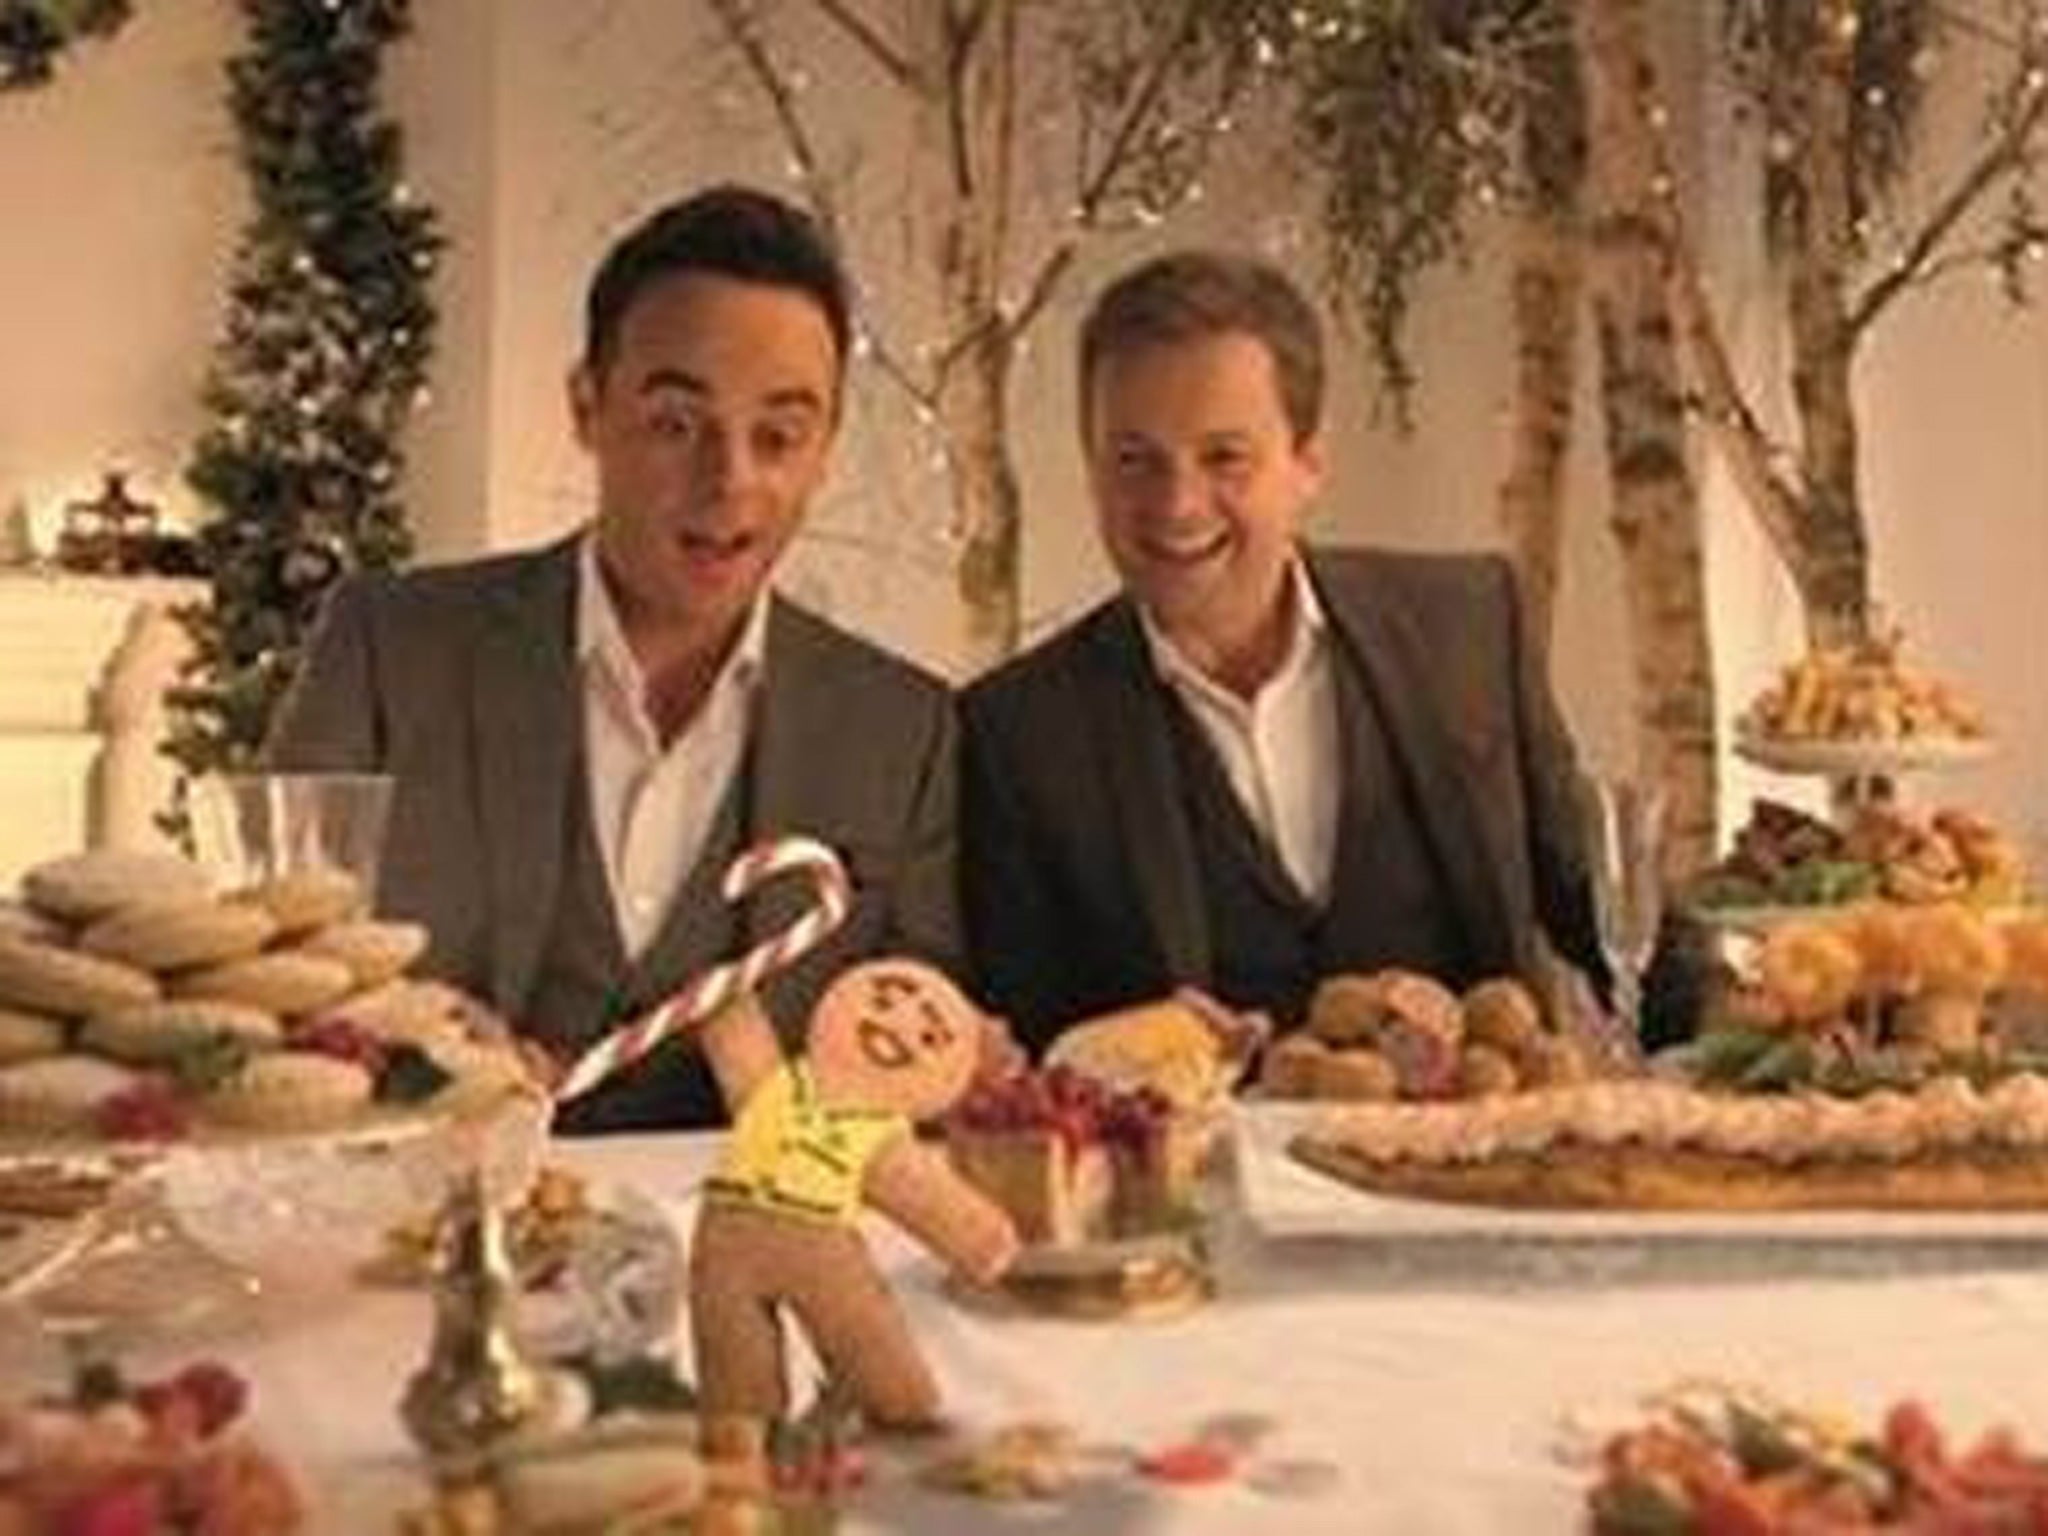 TV presenters Ant and Dec in the Morrisons 2014 Christmas TV advertising campaign